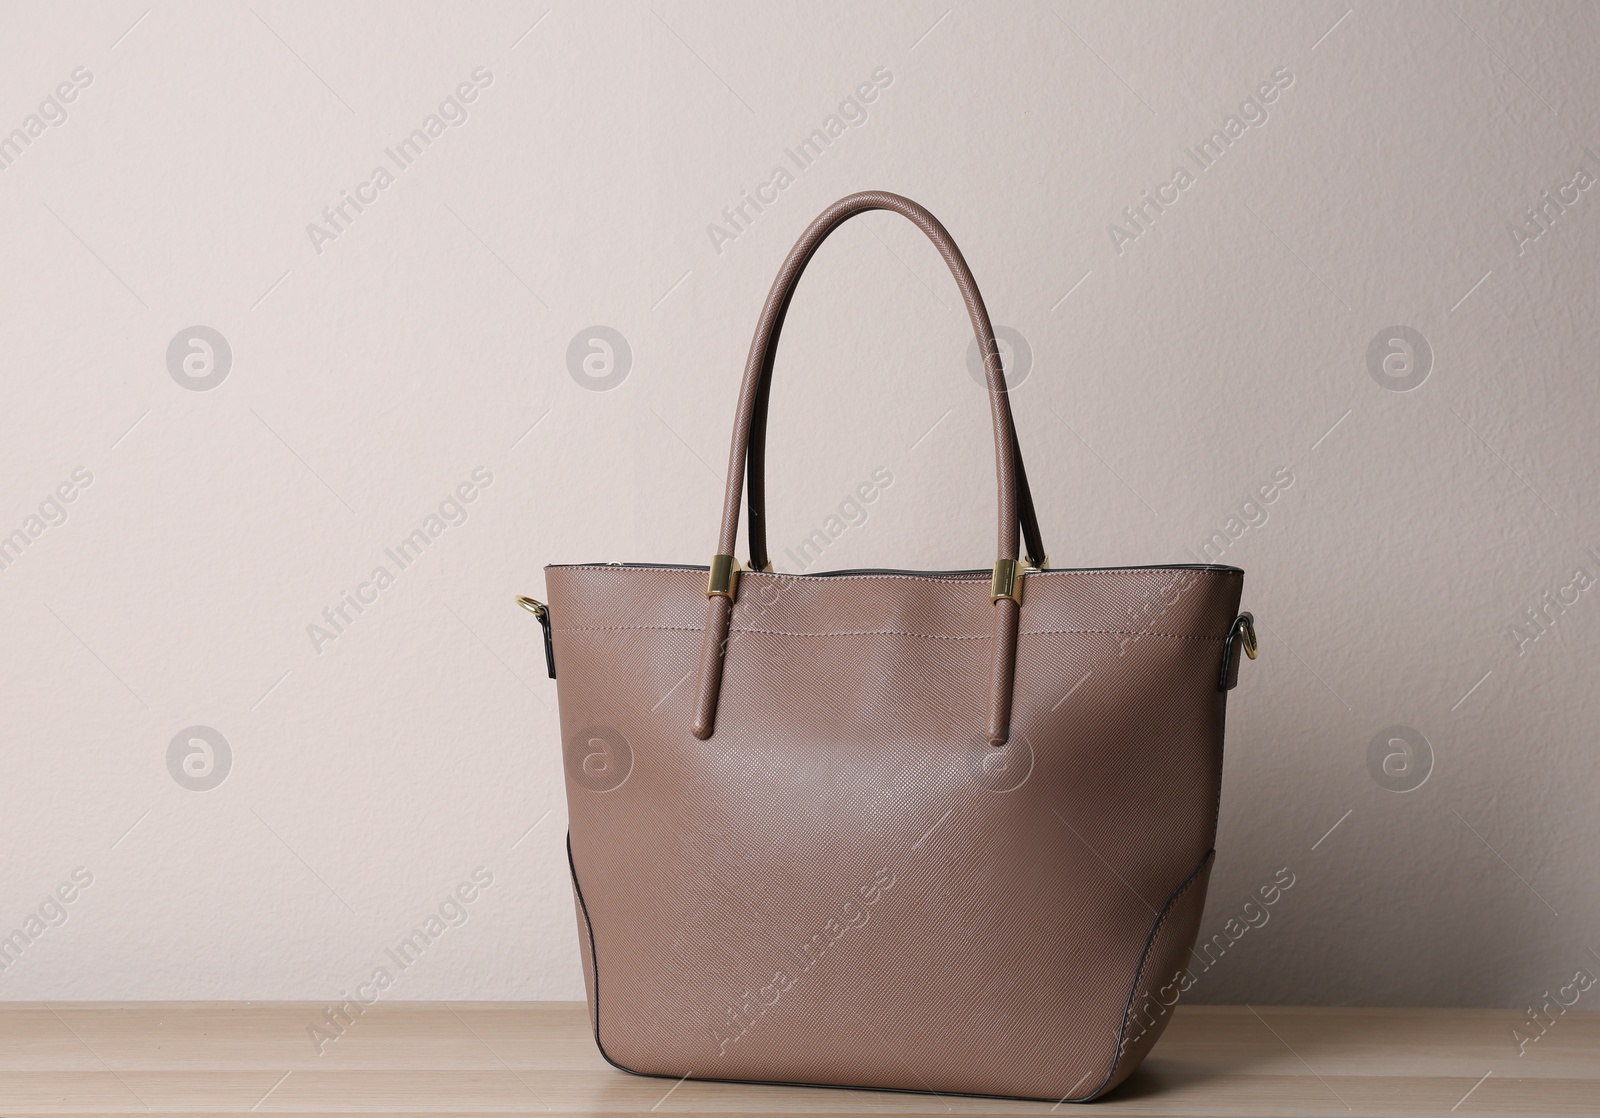 Photo of Stylish leather woman's bag on wooden table